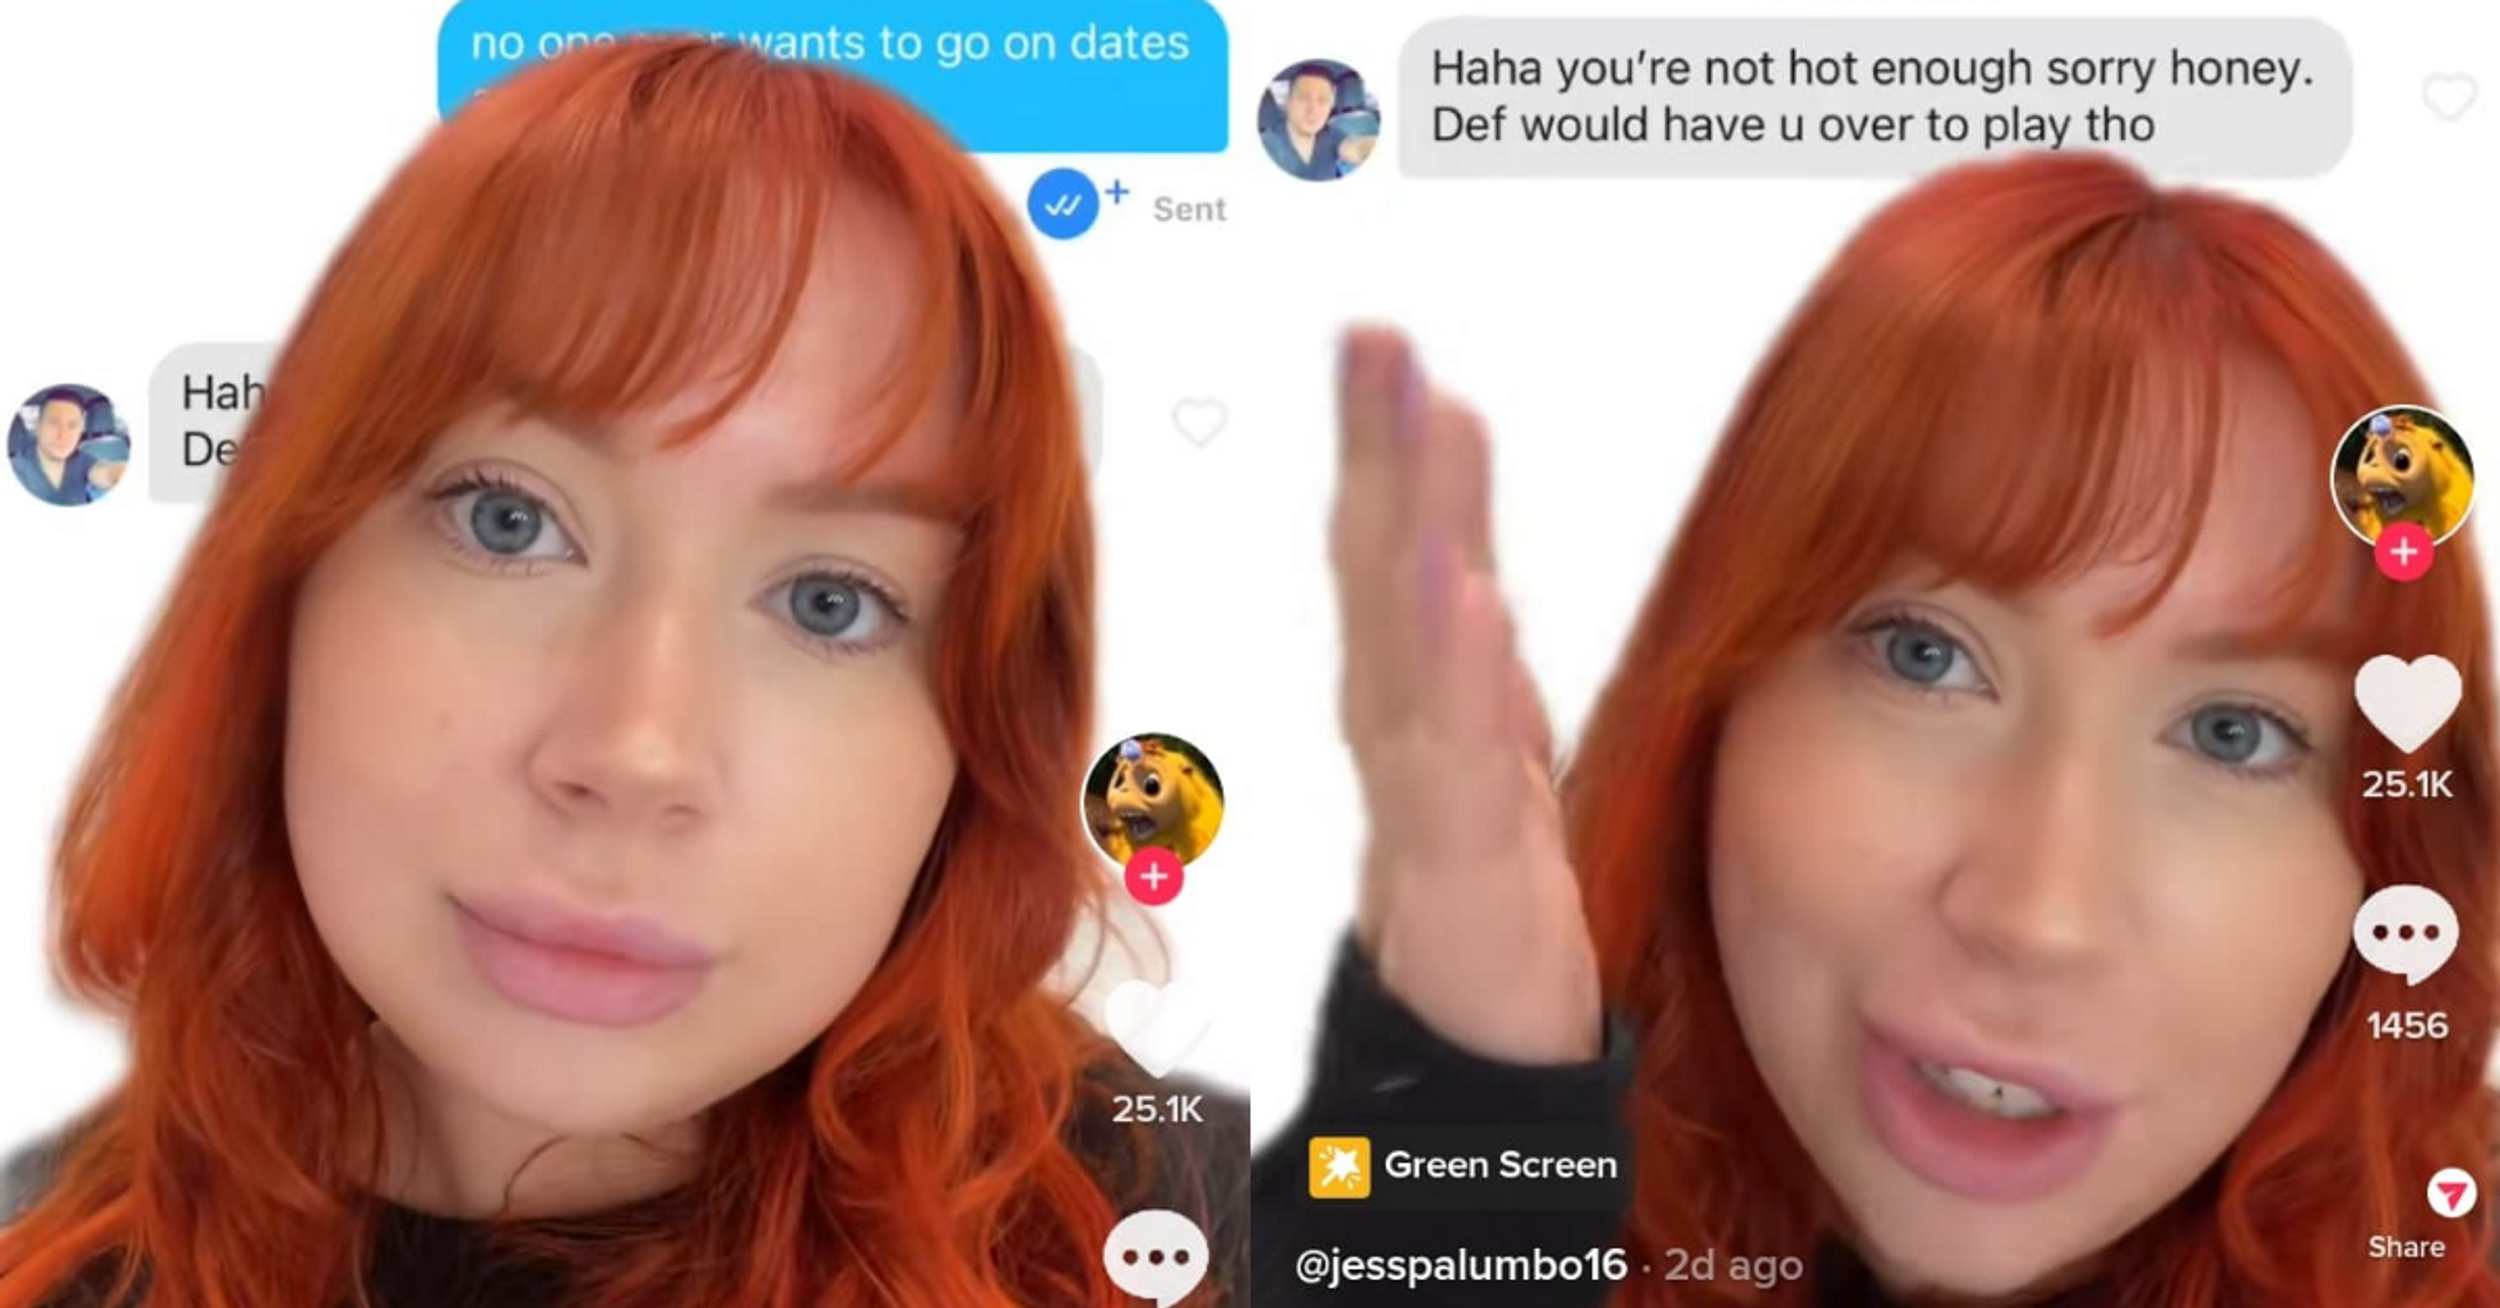 Woman Floored After Tinder Match Tells Her She's 'Not Hot Enough' To Actually Take On A Date